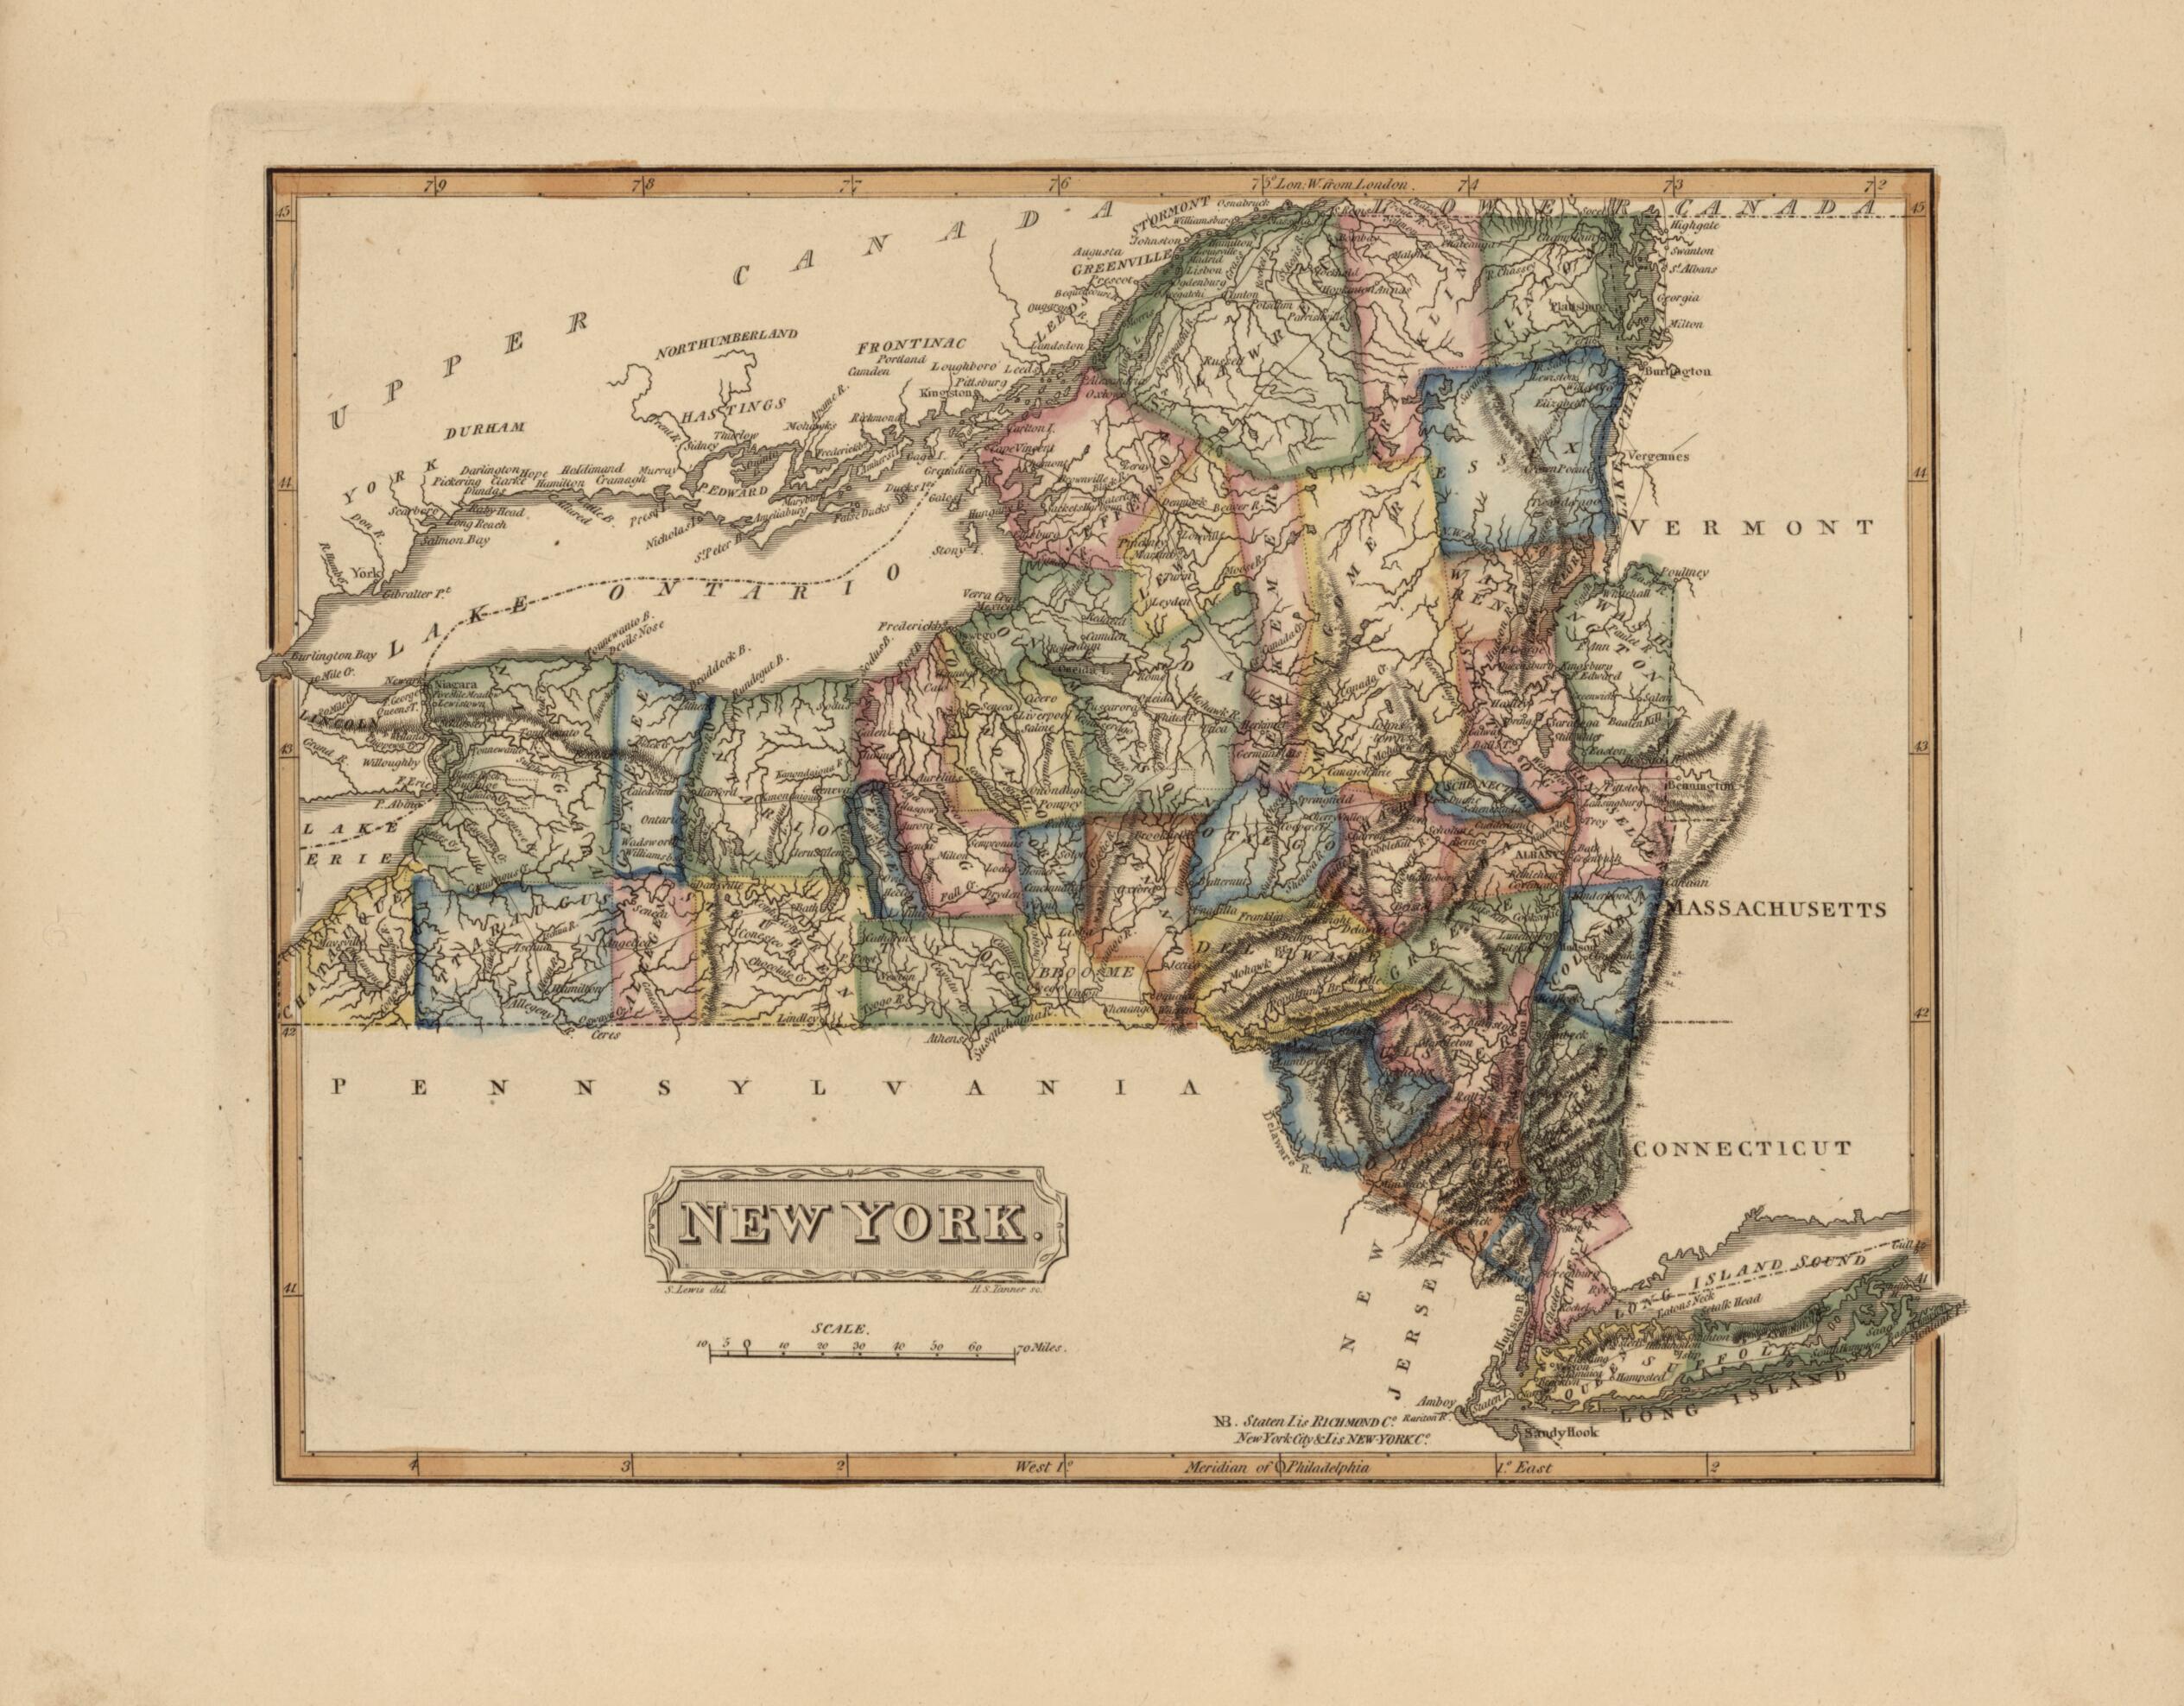 This old map of New York from a New and Elegant General Atlas, Containing Maps of Each of the United States. from 1817 was created by Henry Schenck Tanner in 1817